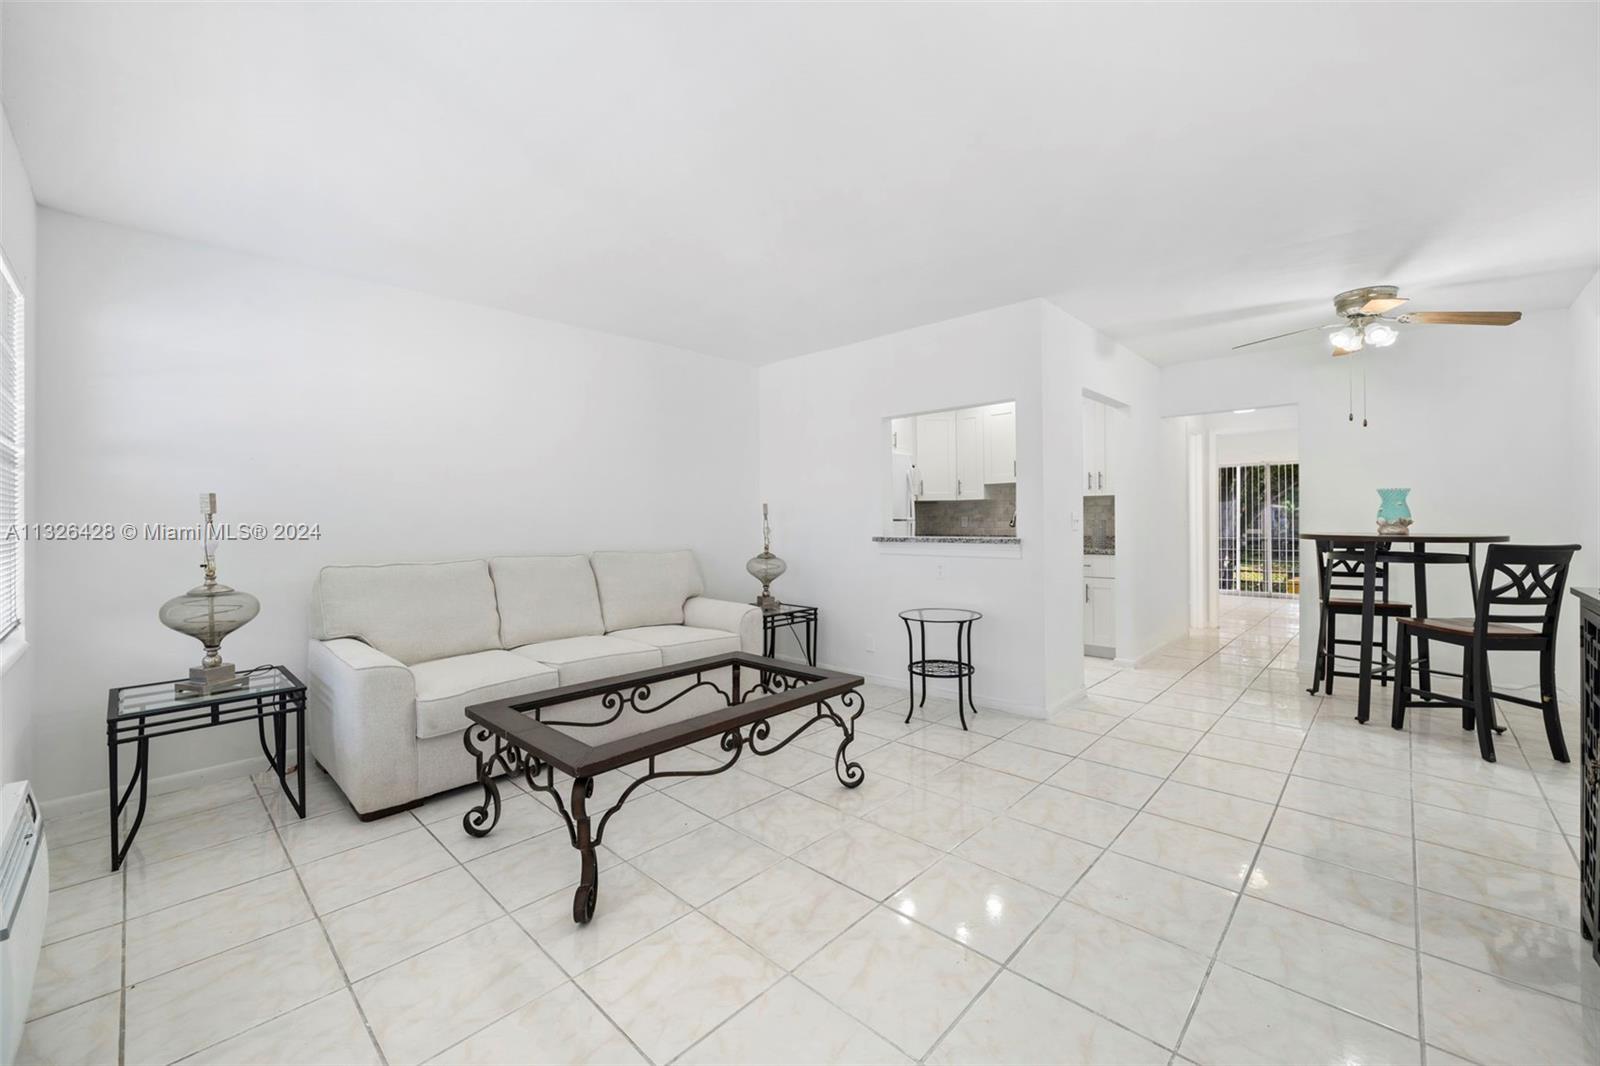 163 Coventry G 163, West Palm Beach, Palm Beach County, Florida - 1 Bedrooms  
1 Bathrooms - 